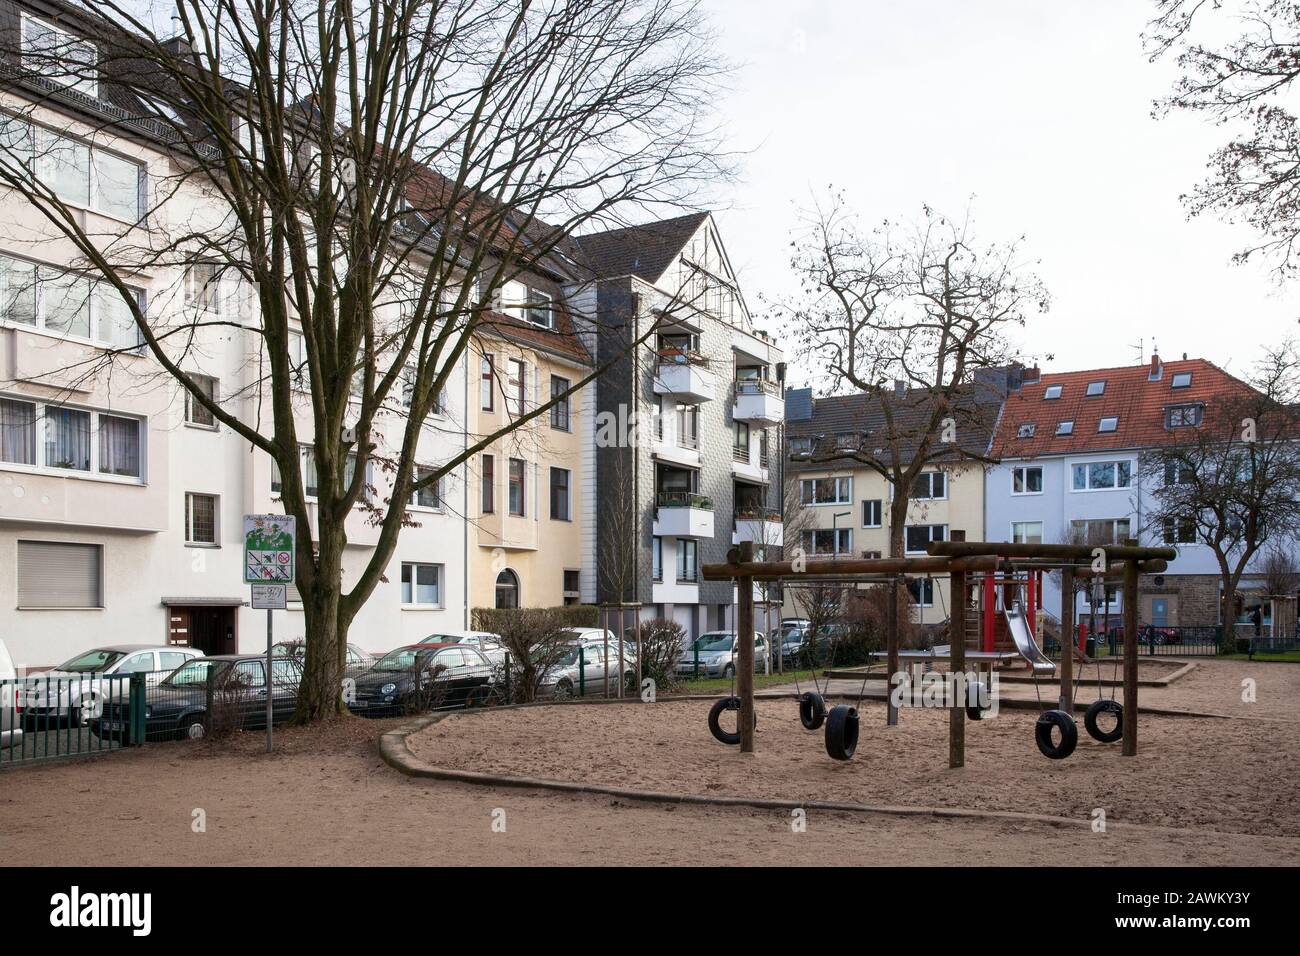 children's playground on Theophanoplatz in the district Zollstock, Cologne, Germany.  Kinderspielplatz auf dem Theophanoplatz im Stadtteil Zollstock, Stock Photo